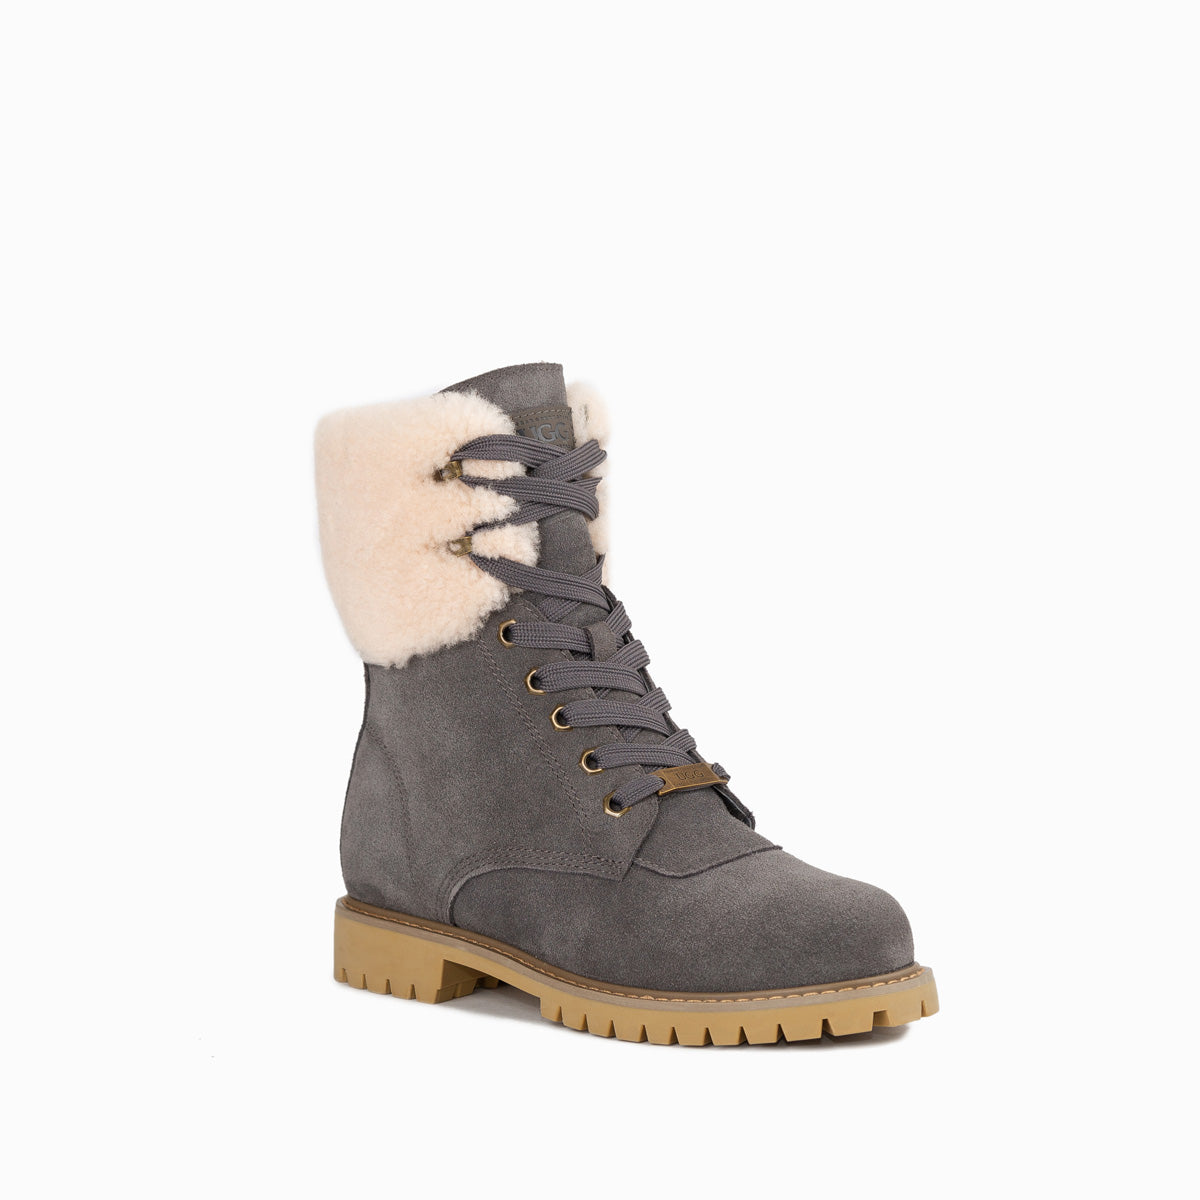 Ugg Liliana Shearling Zip Boots-Boots-PEROZ Accessories